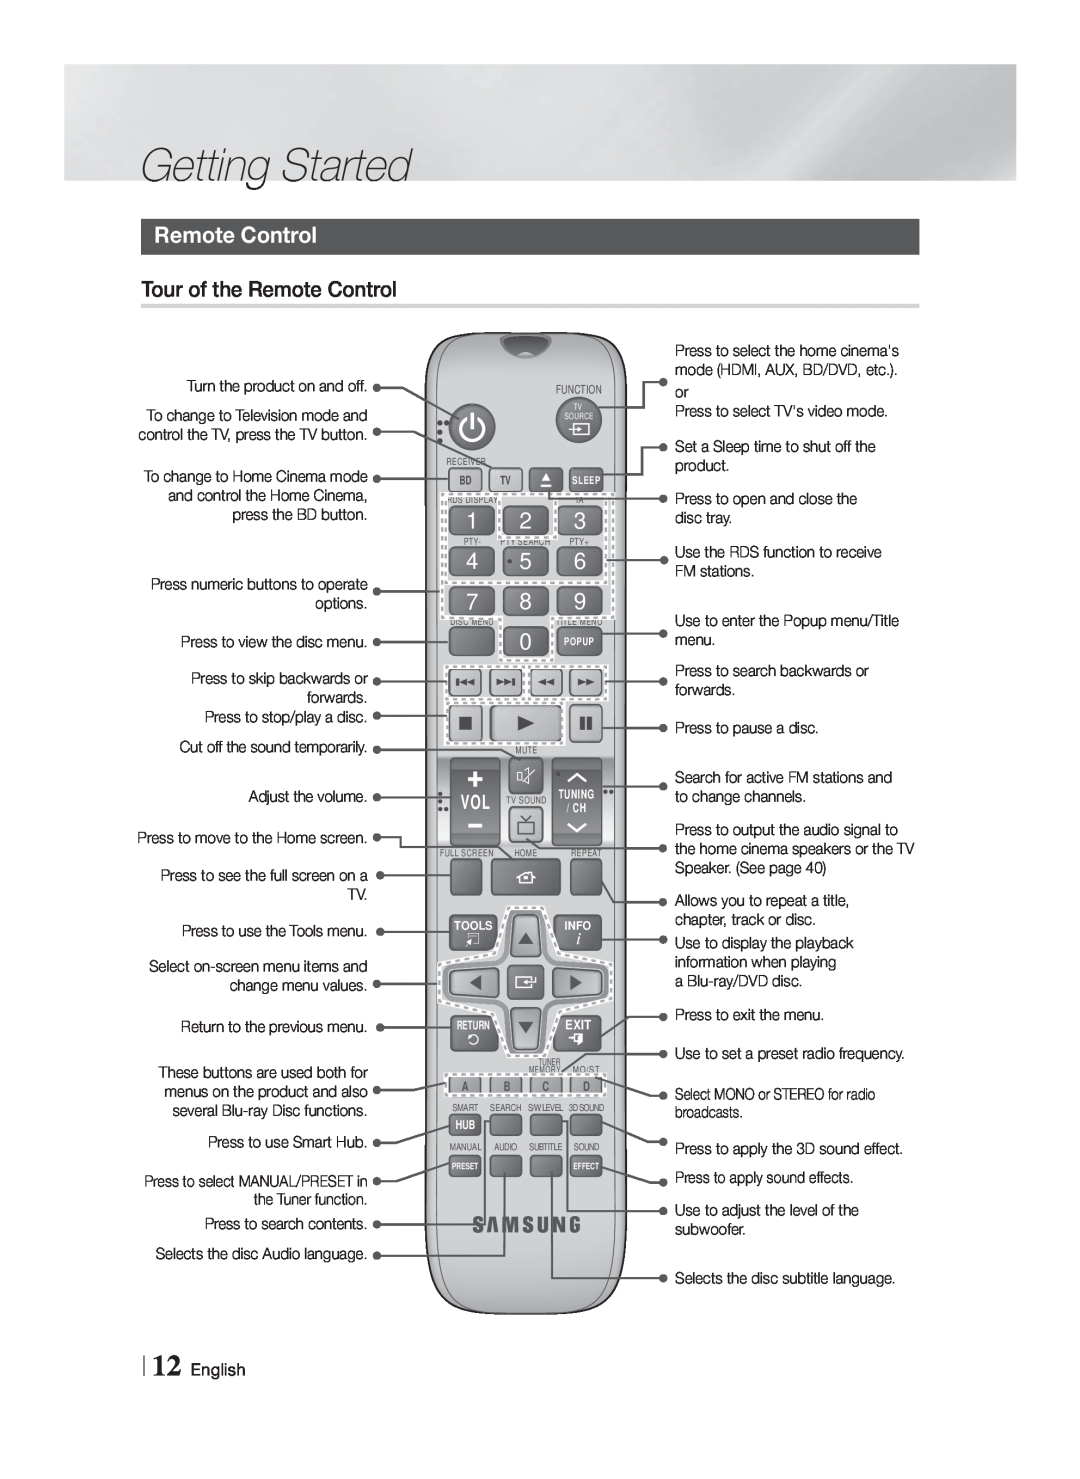 Samsung HT-F5200/ZF, HT-FS5200/XN, HT-F5200/XN, HT-F5200/EN manual Tour of the Remote Control, English, Getting Started 